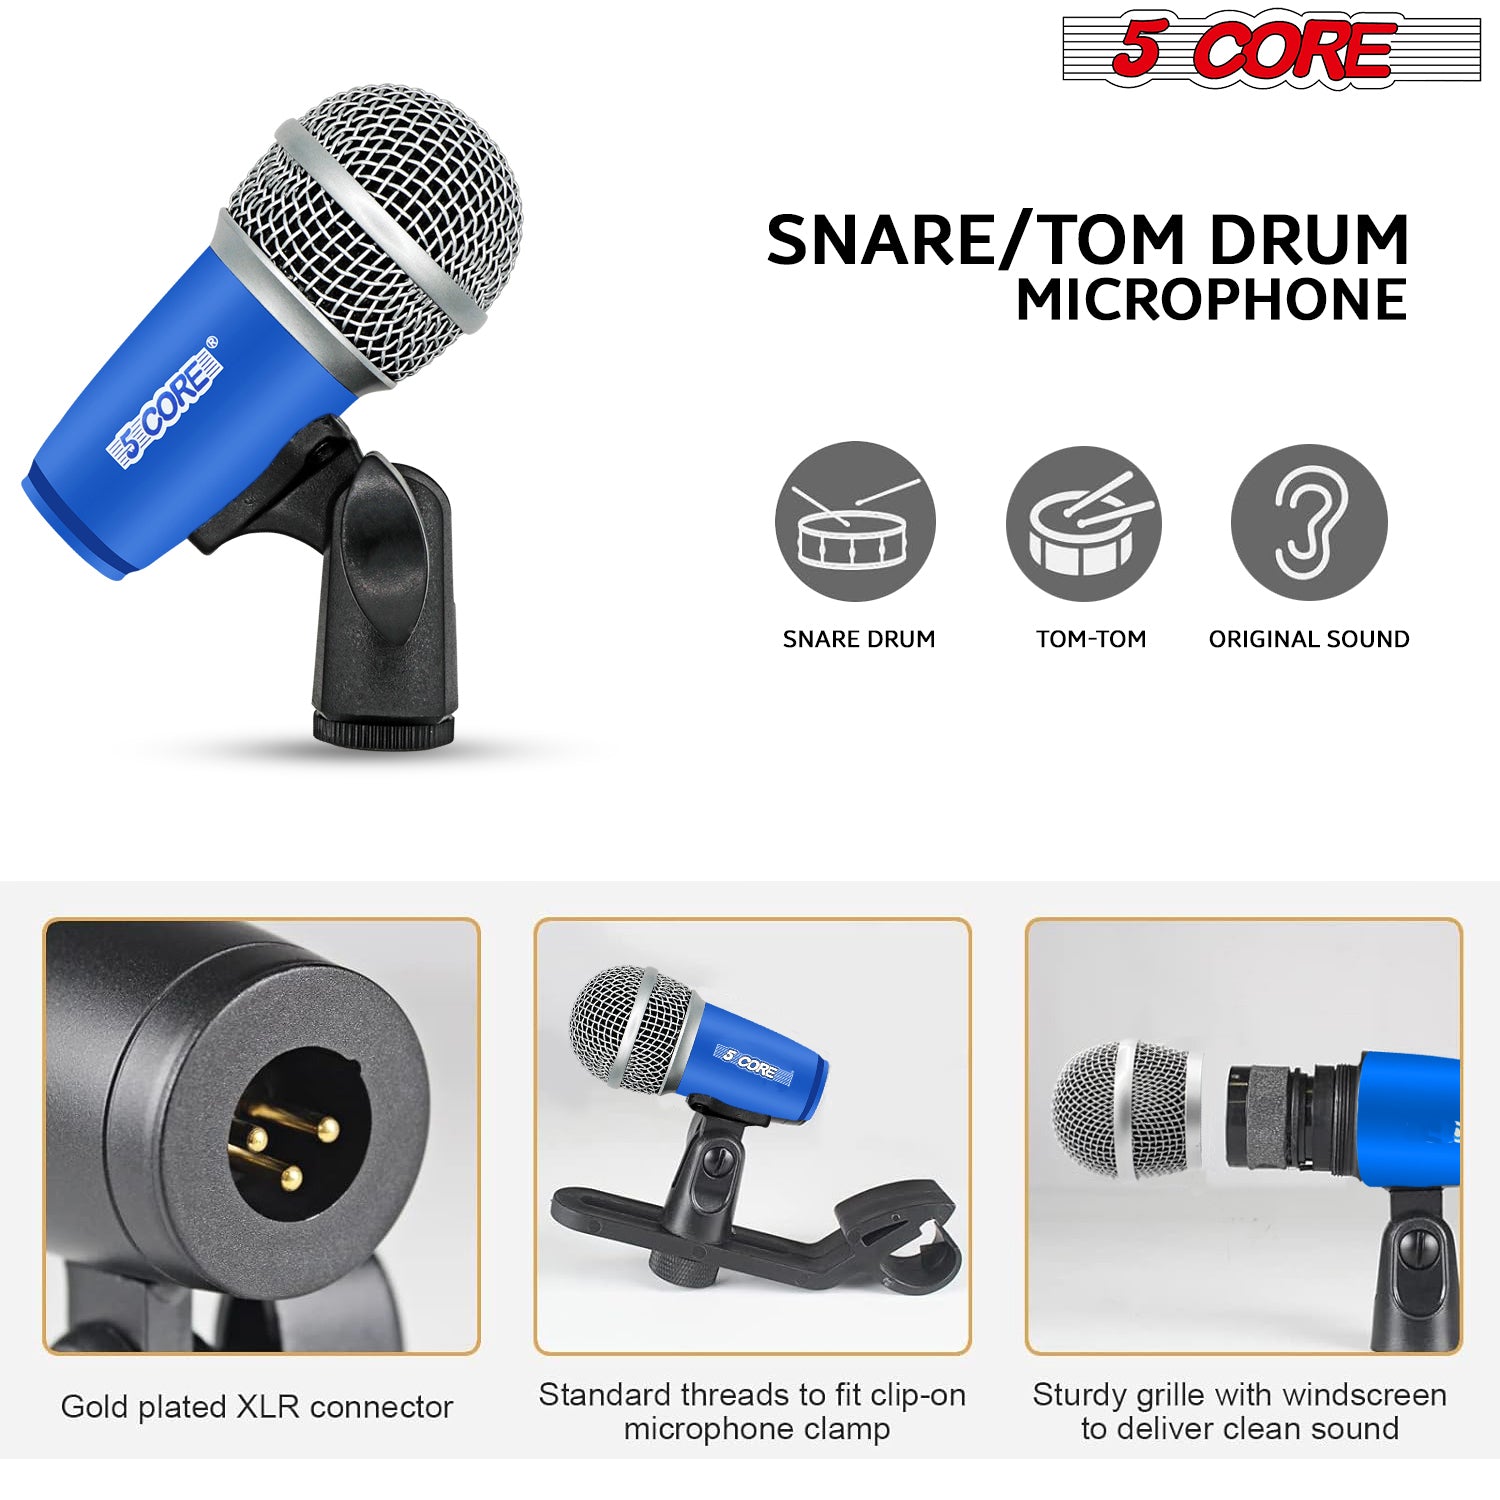 5 Core 9-piece dynamic microphone set for drummers and percussionists